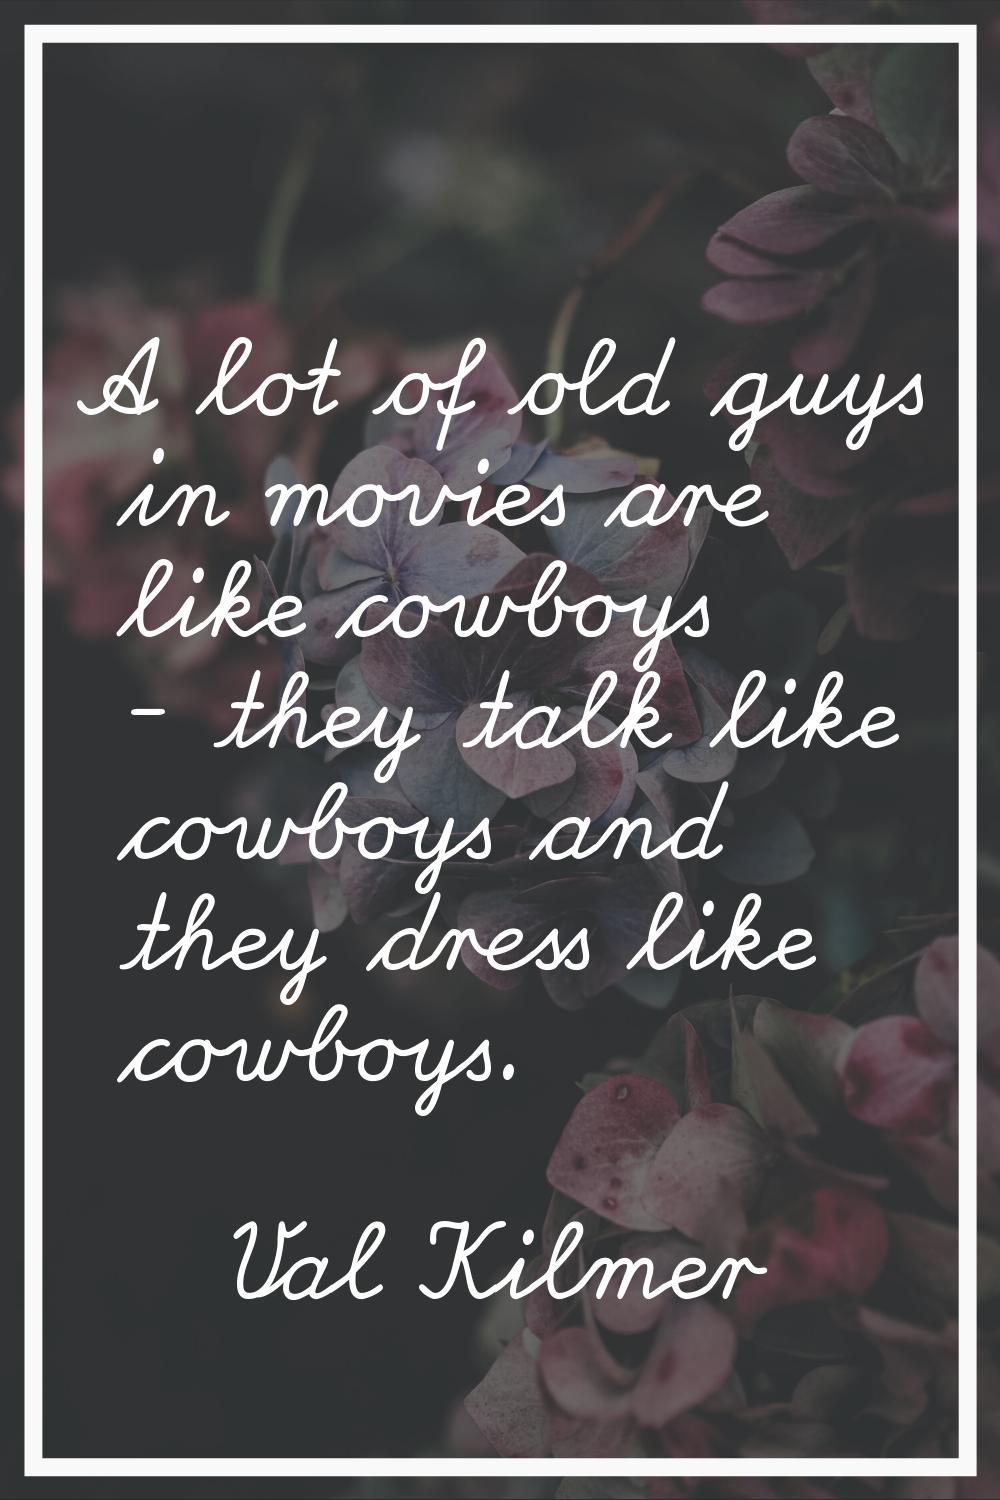 A lot of old guys in movies are like cowboys - they talk like cowboys and they dress like cowboys.